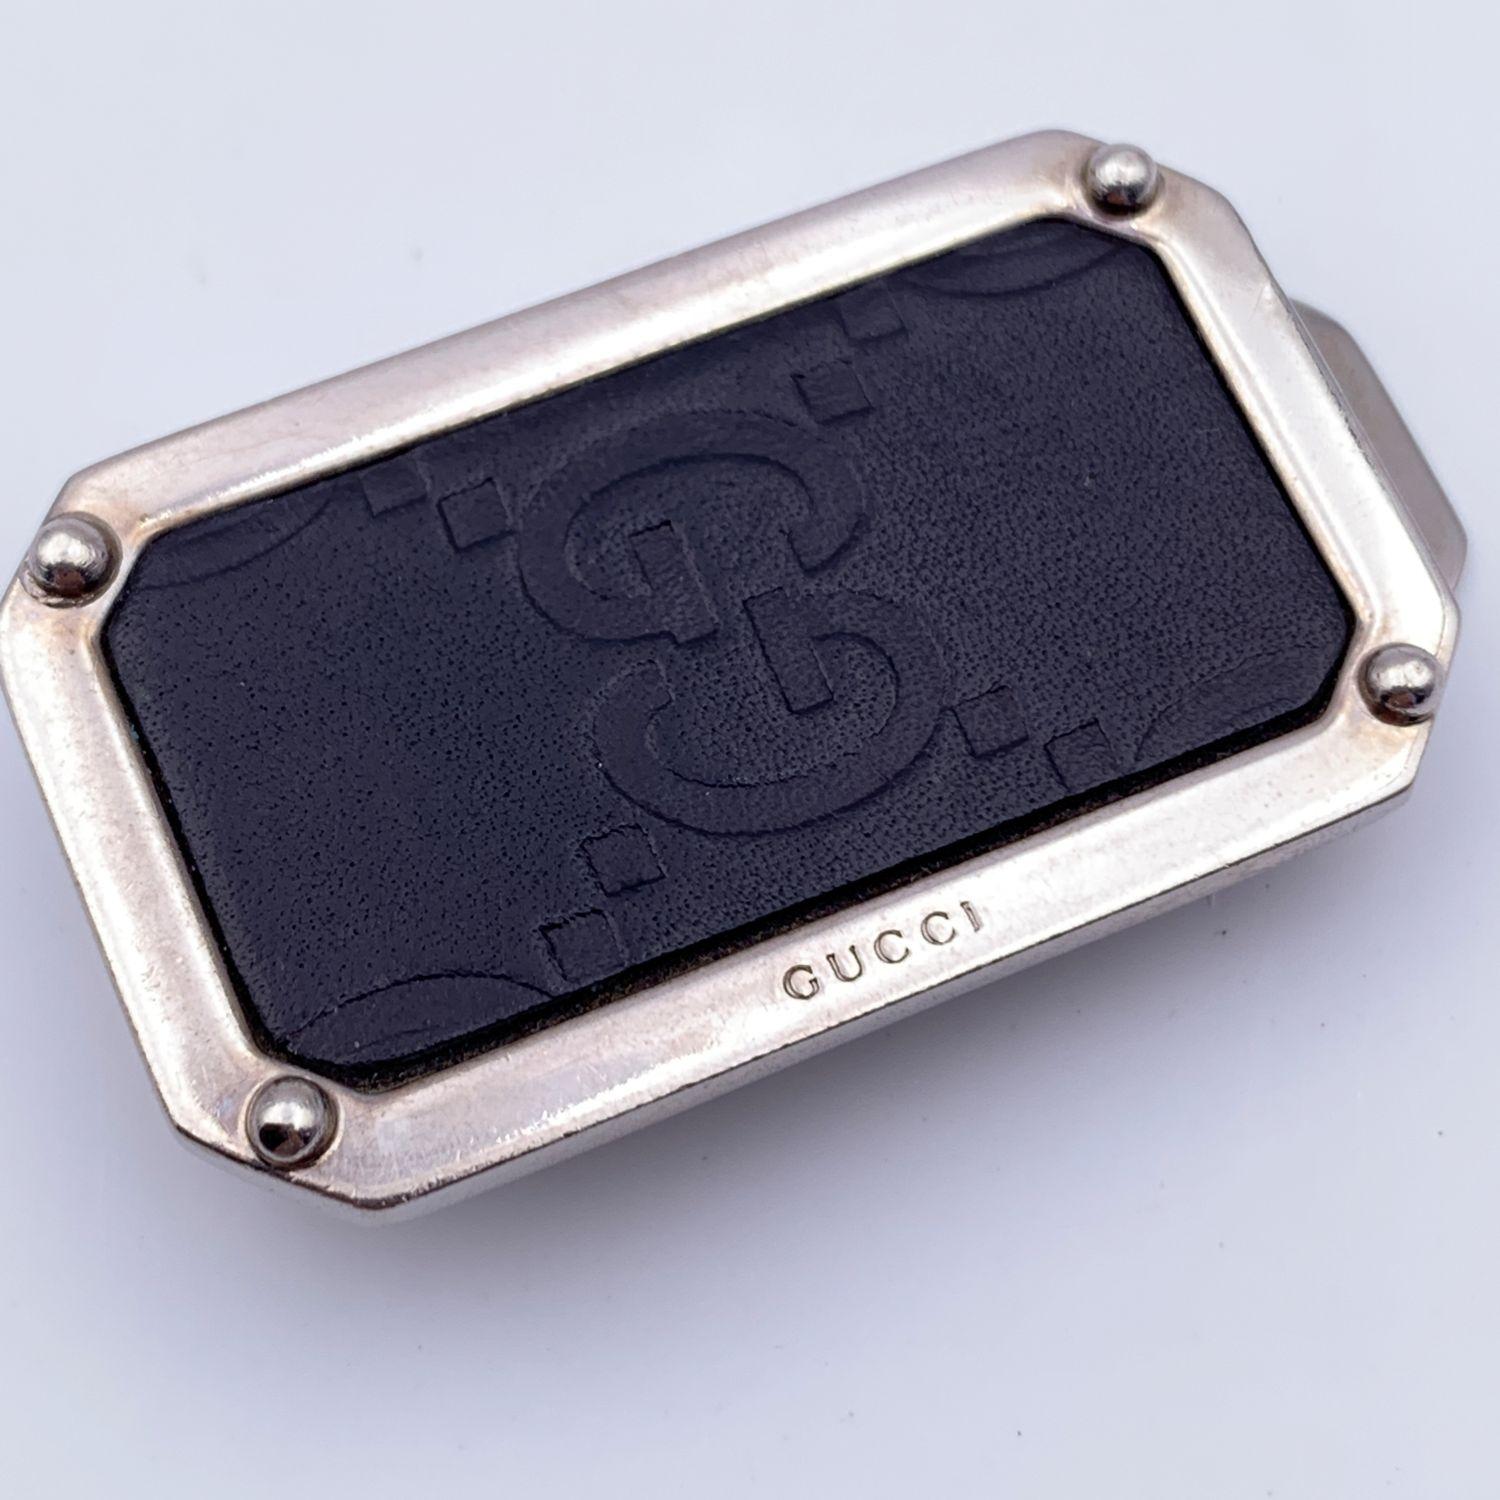 Vintage Gucci money clip in silver metal and black monogram leather. Rectangular shape. Height: 2 inches - 5.1 cm. Width: 1.10 inches - 3 cm. Marked 'Gucci - Made in Italy' on the clip.

Details

MATERIAL: Metal

COLOR: Black

MODEL: -

GENDER: